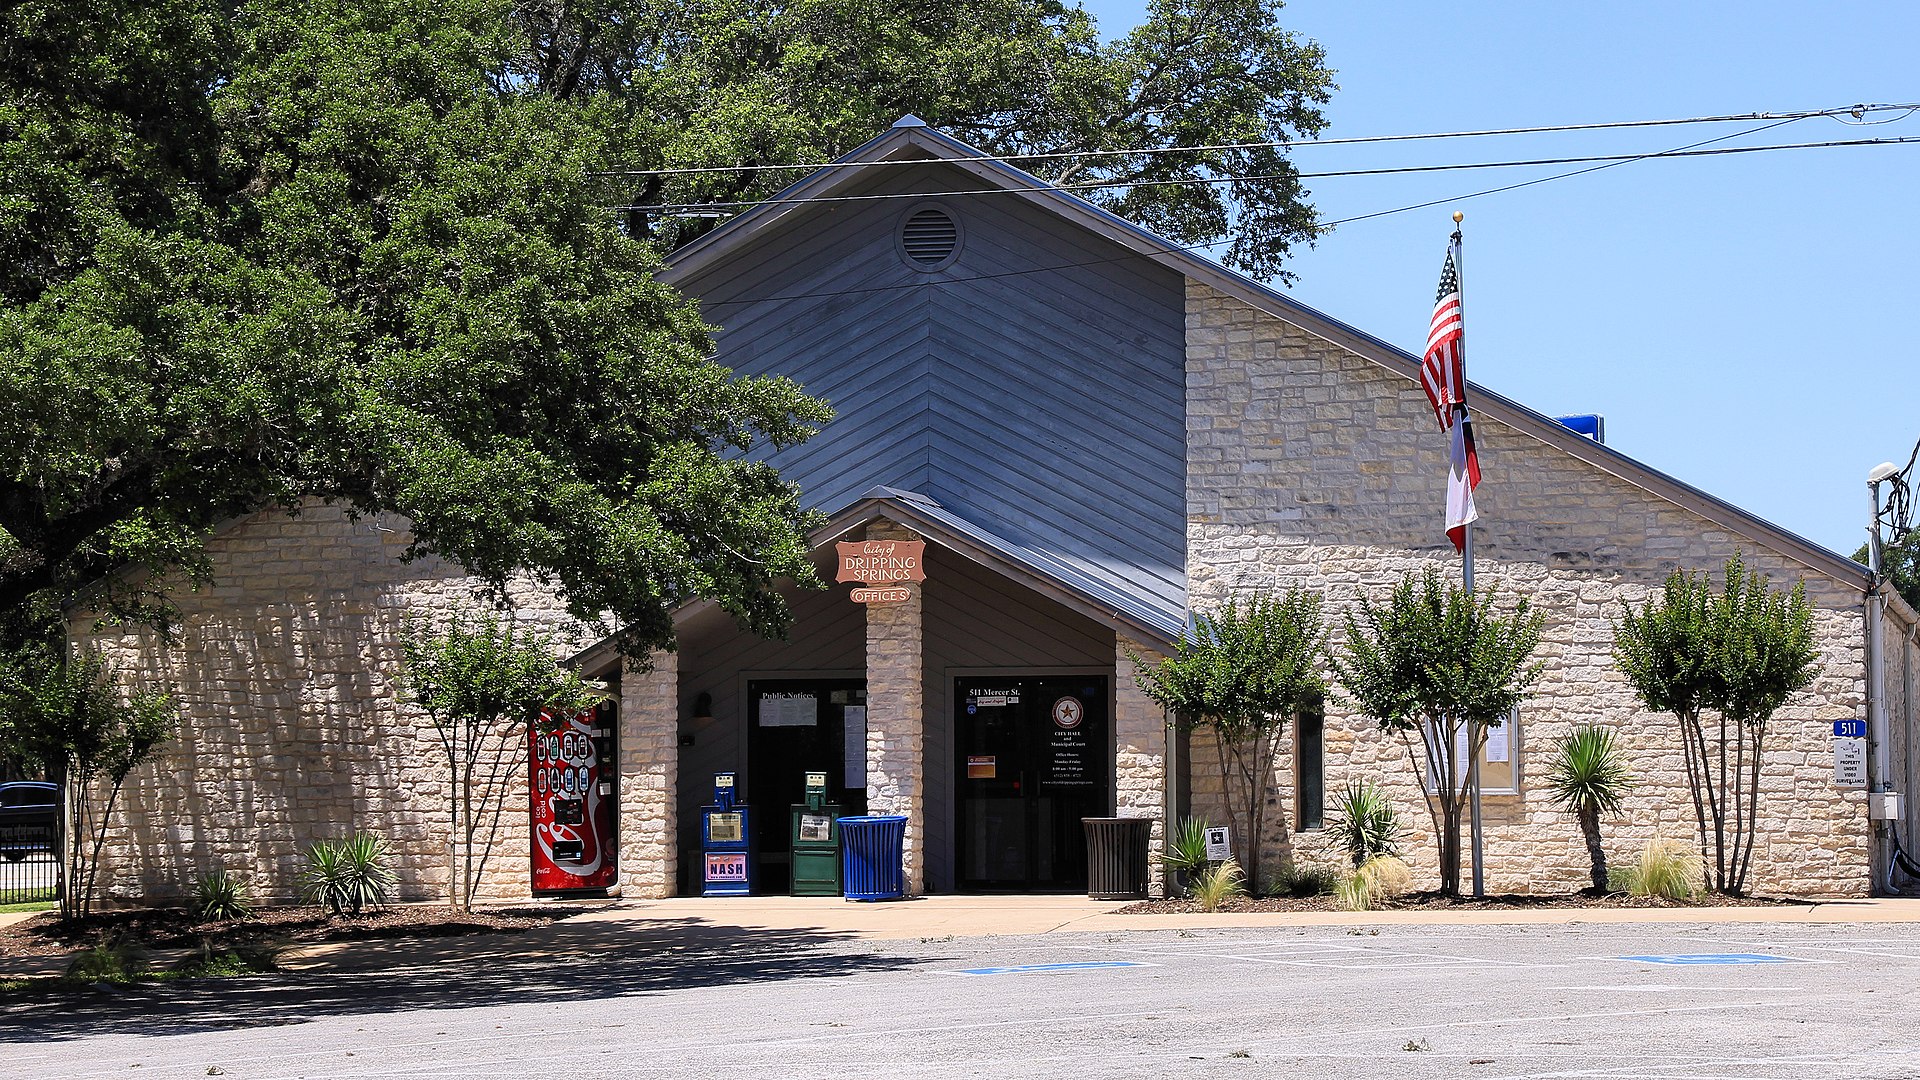 1920px-Dripping_Springs_Texas_City_Hall_2019